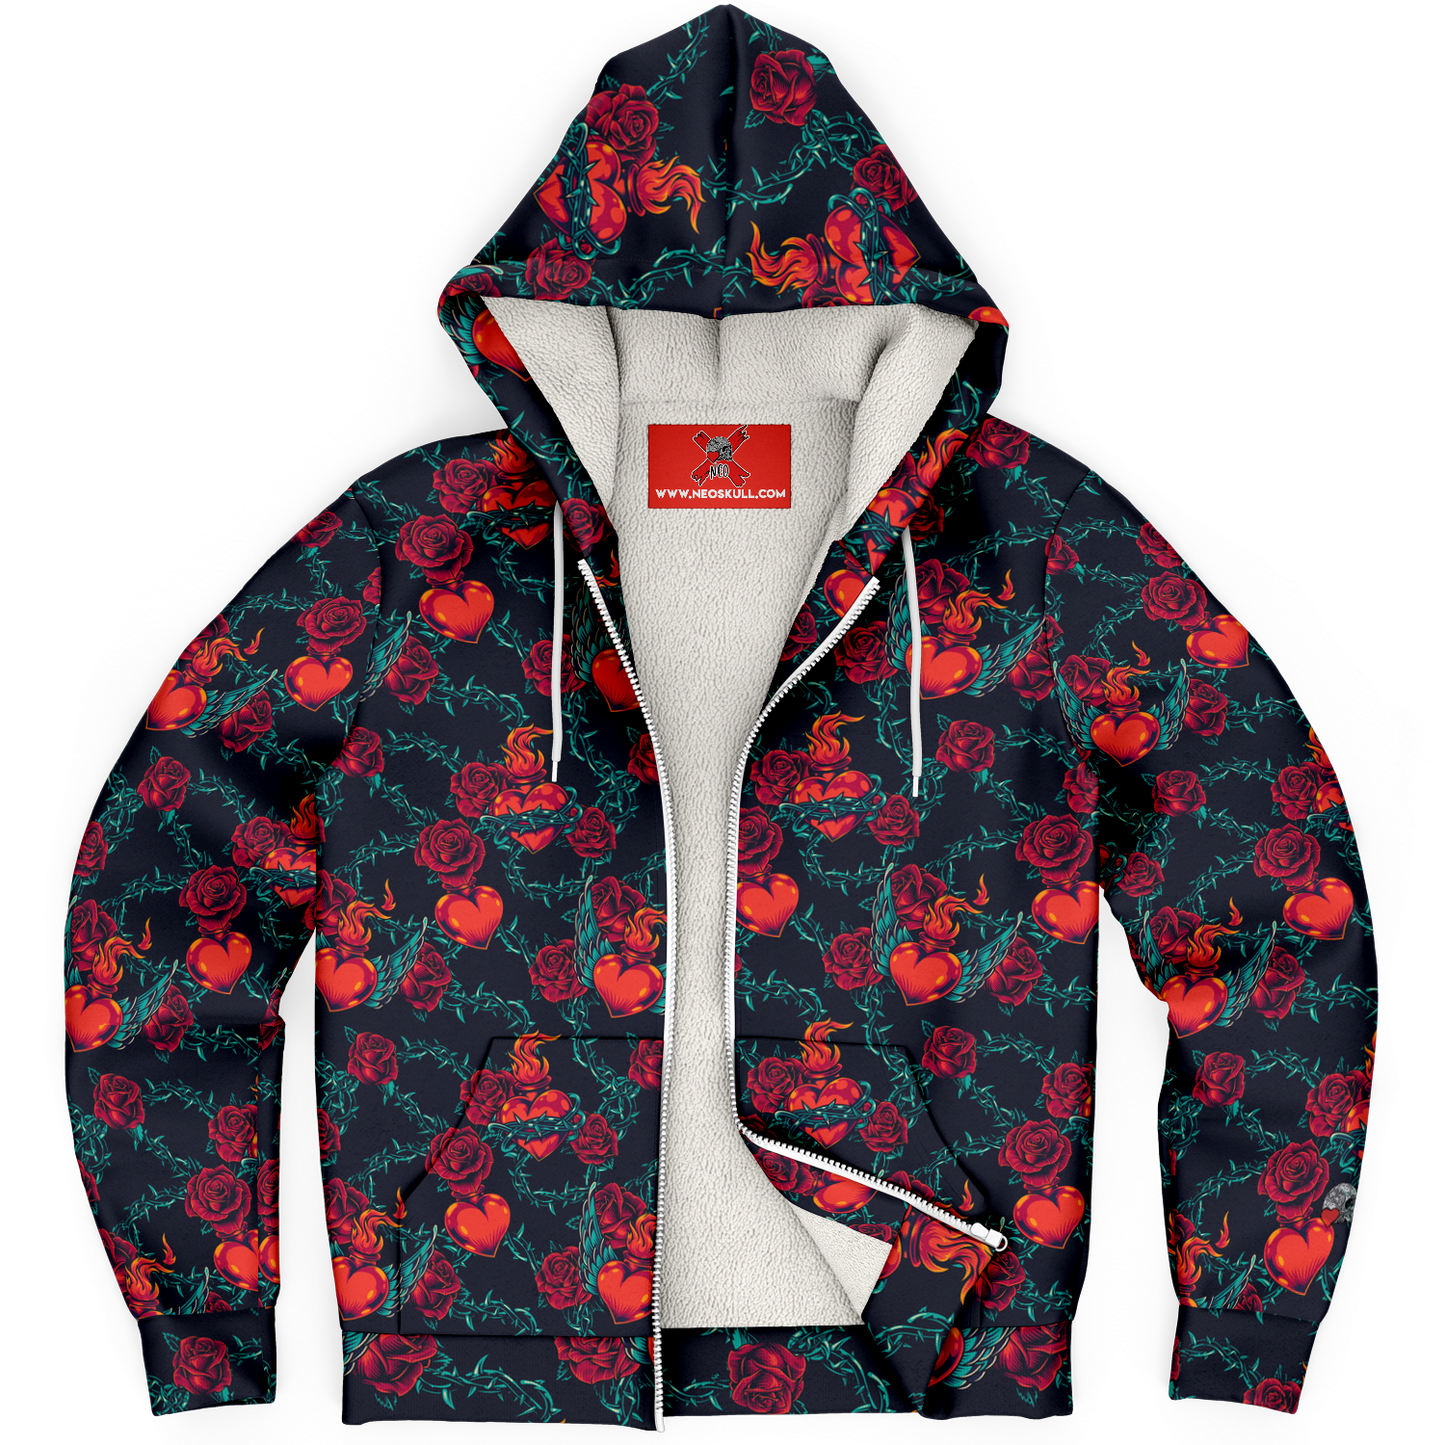 Fiery Hearts and Roses Zip-up hoodie features